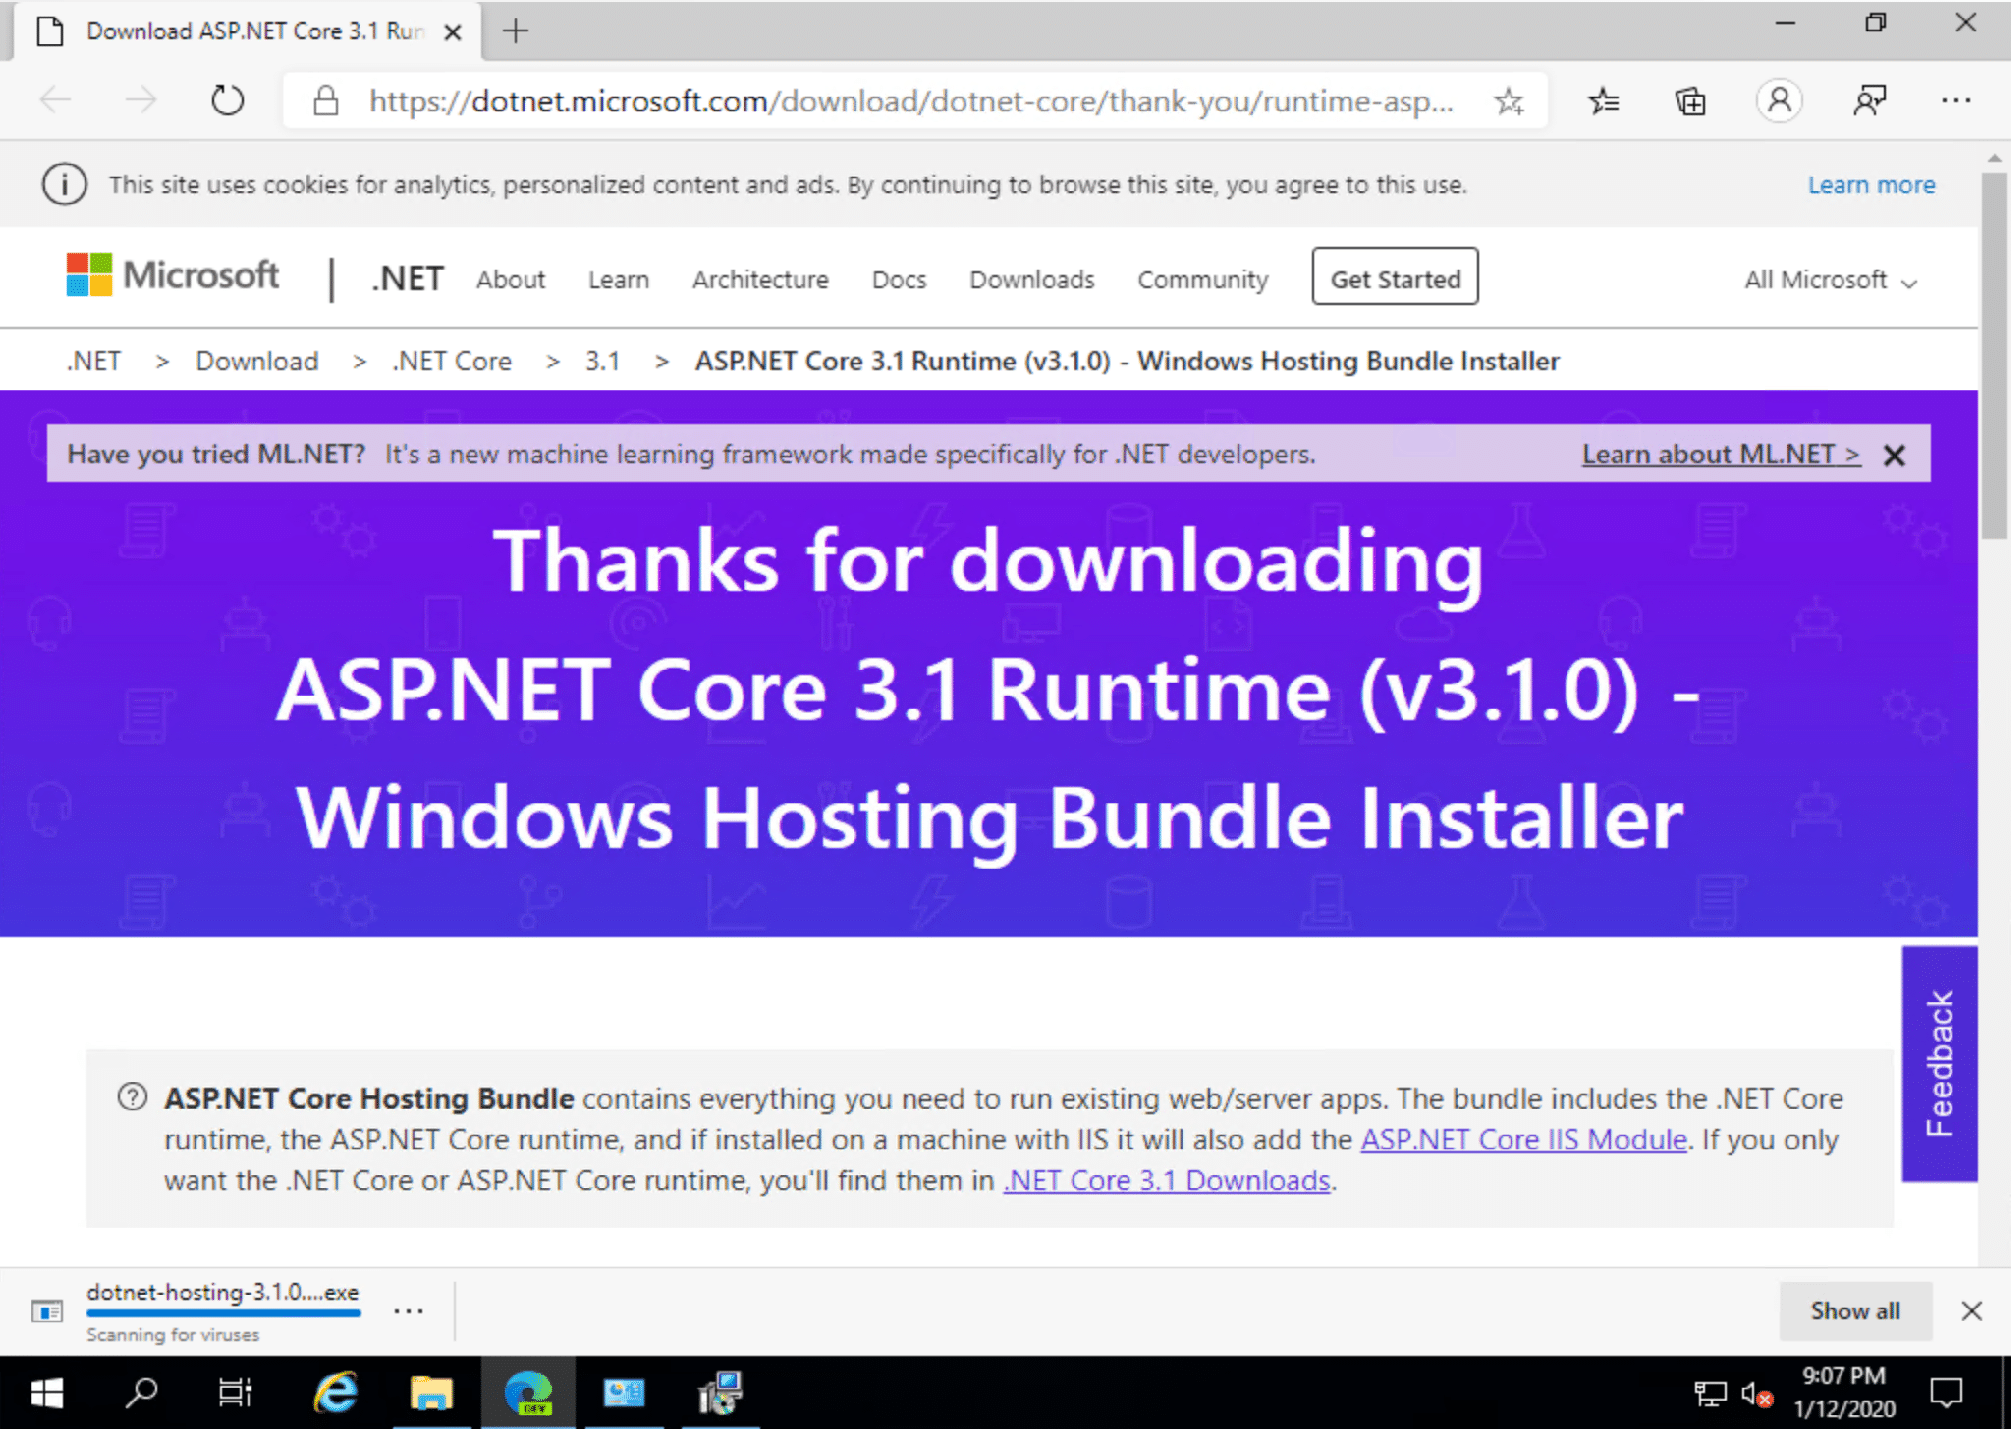 Start the download of the .Net Core 3.1.0 Windows Server Hosting